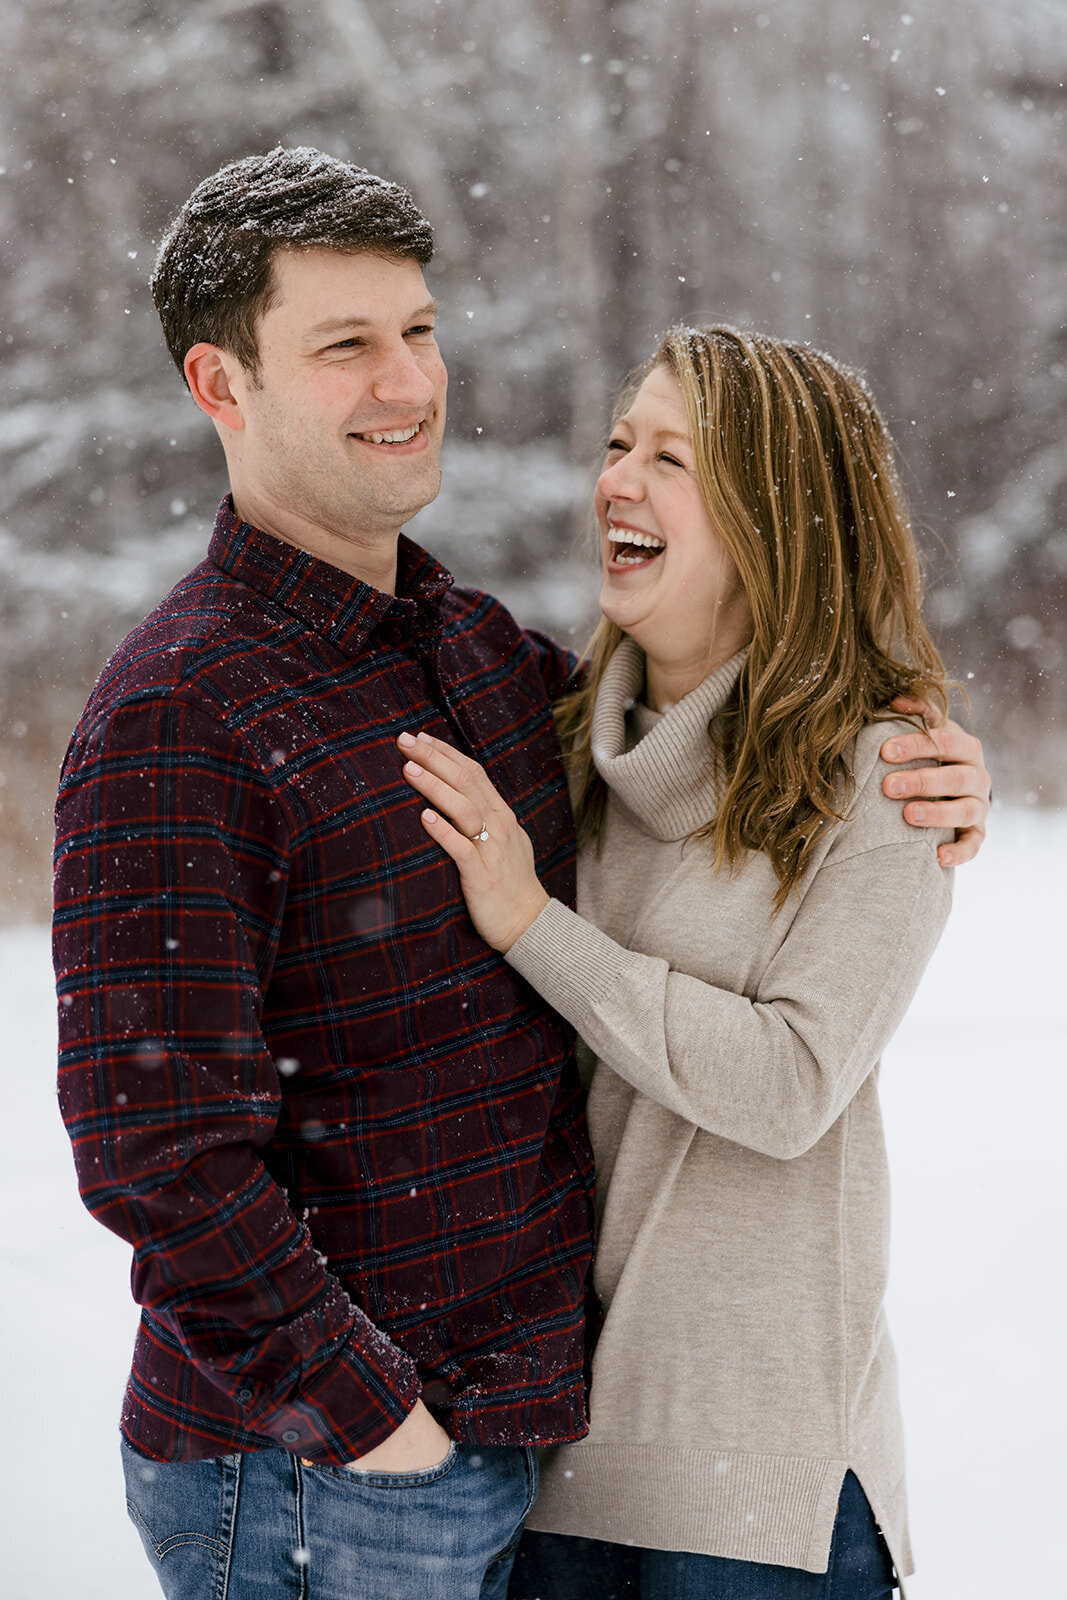 Black sand beach engagement photos in the snow